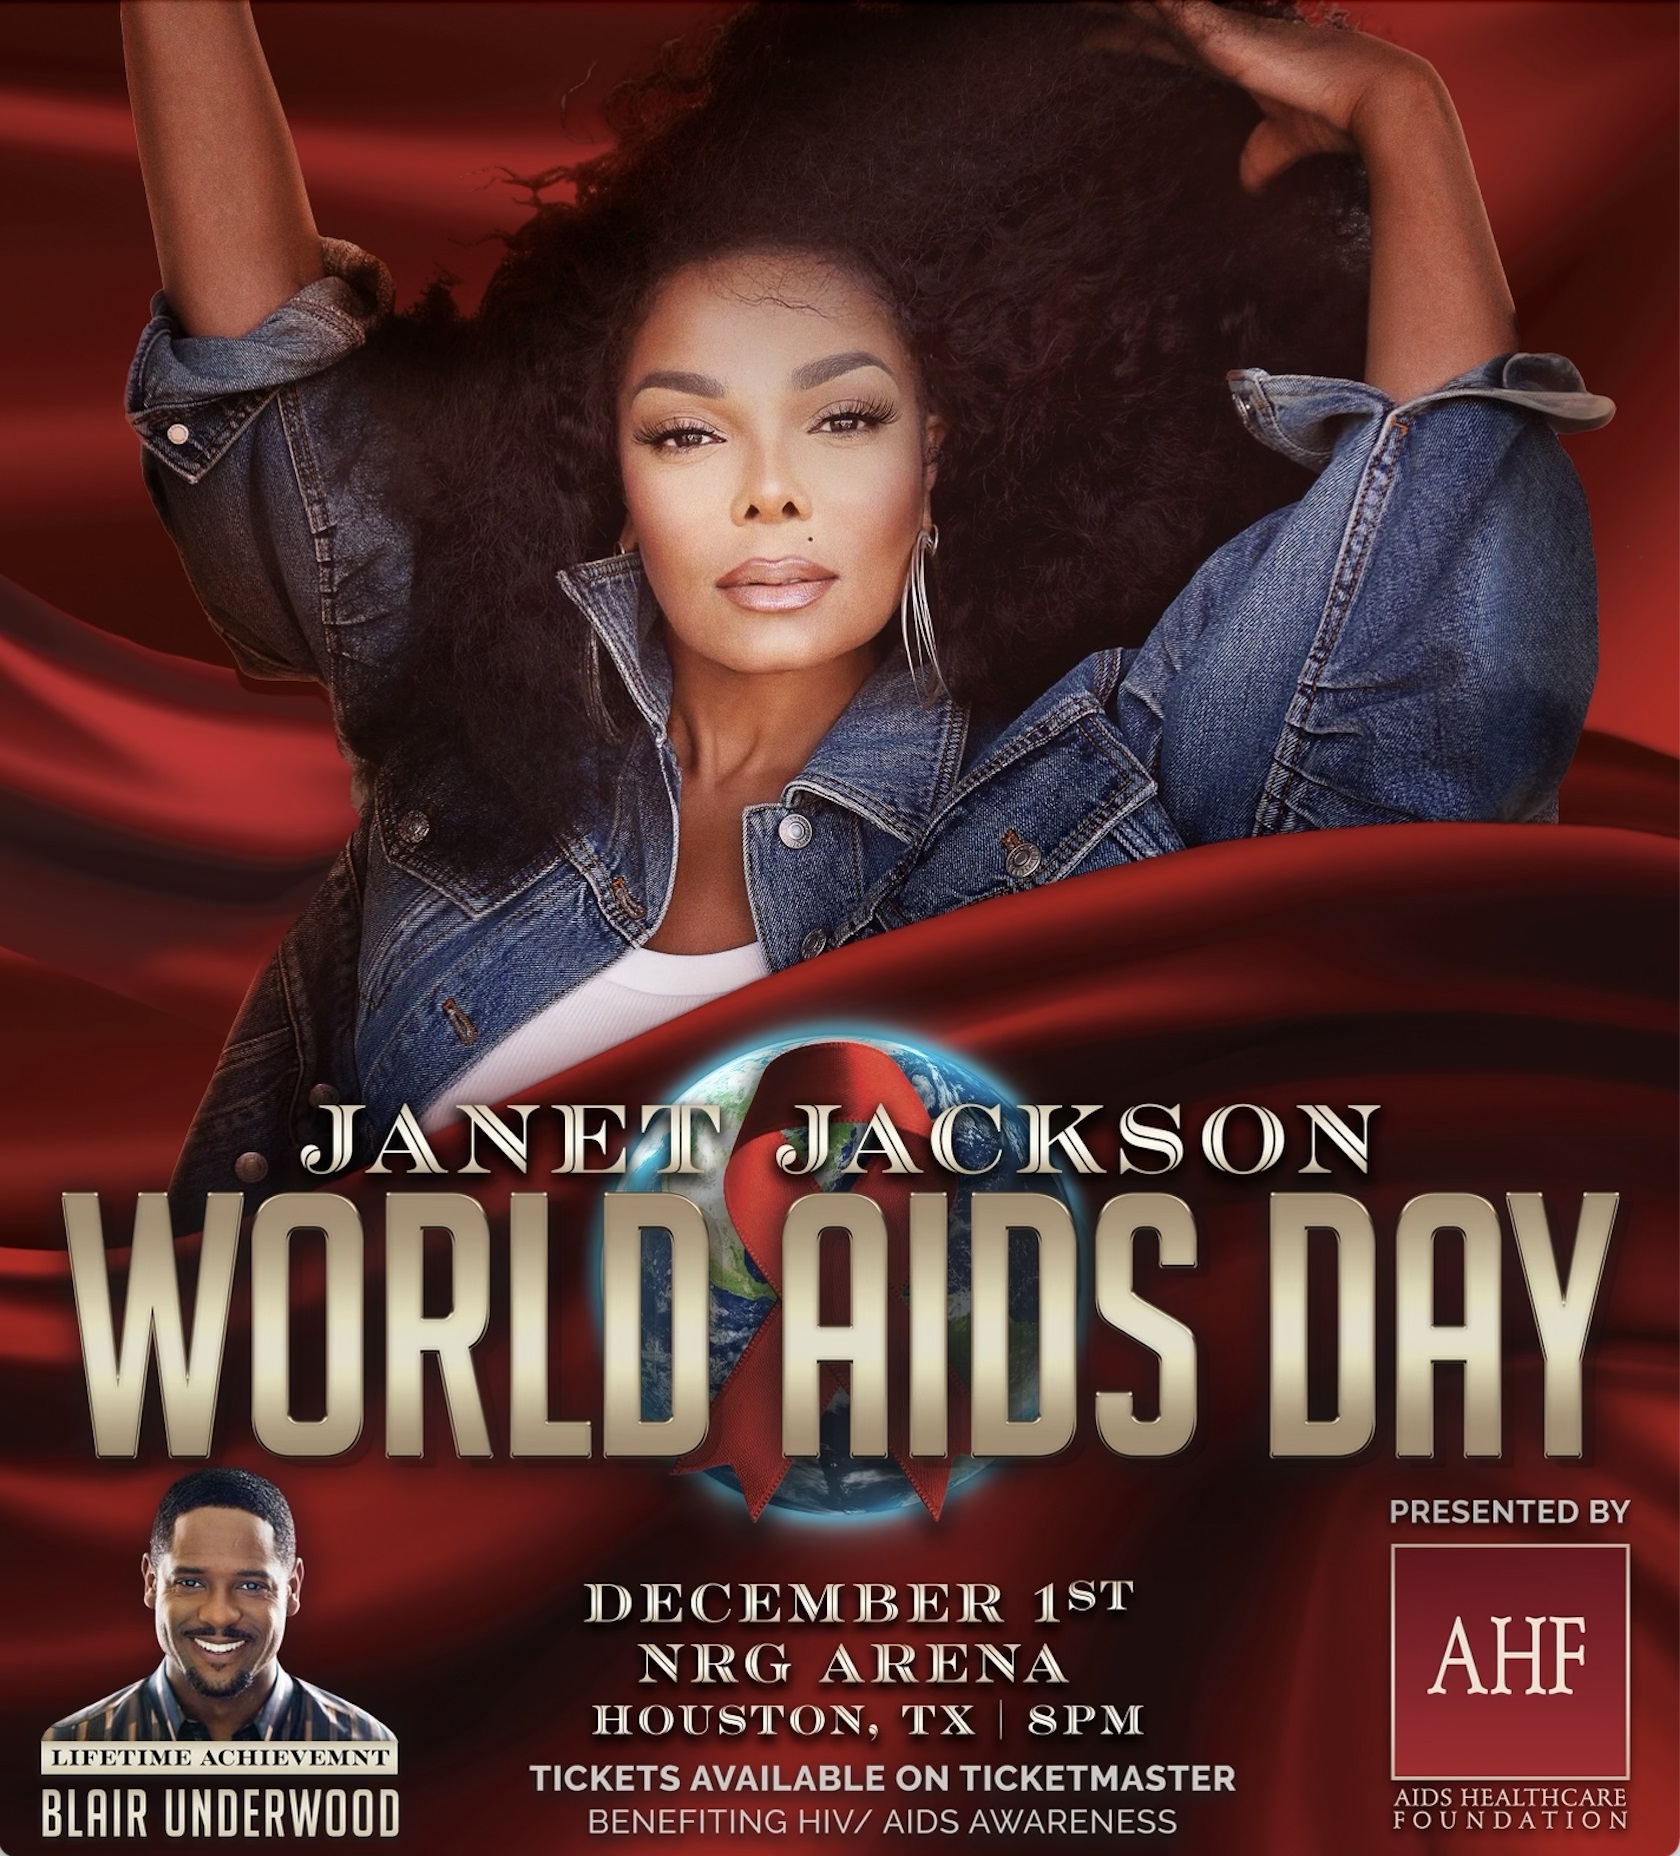 Global Icon Janet Jackson to Headline World AIDS Day Event in Houston